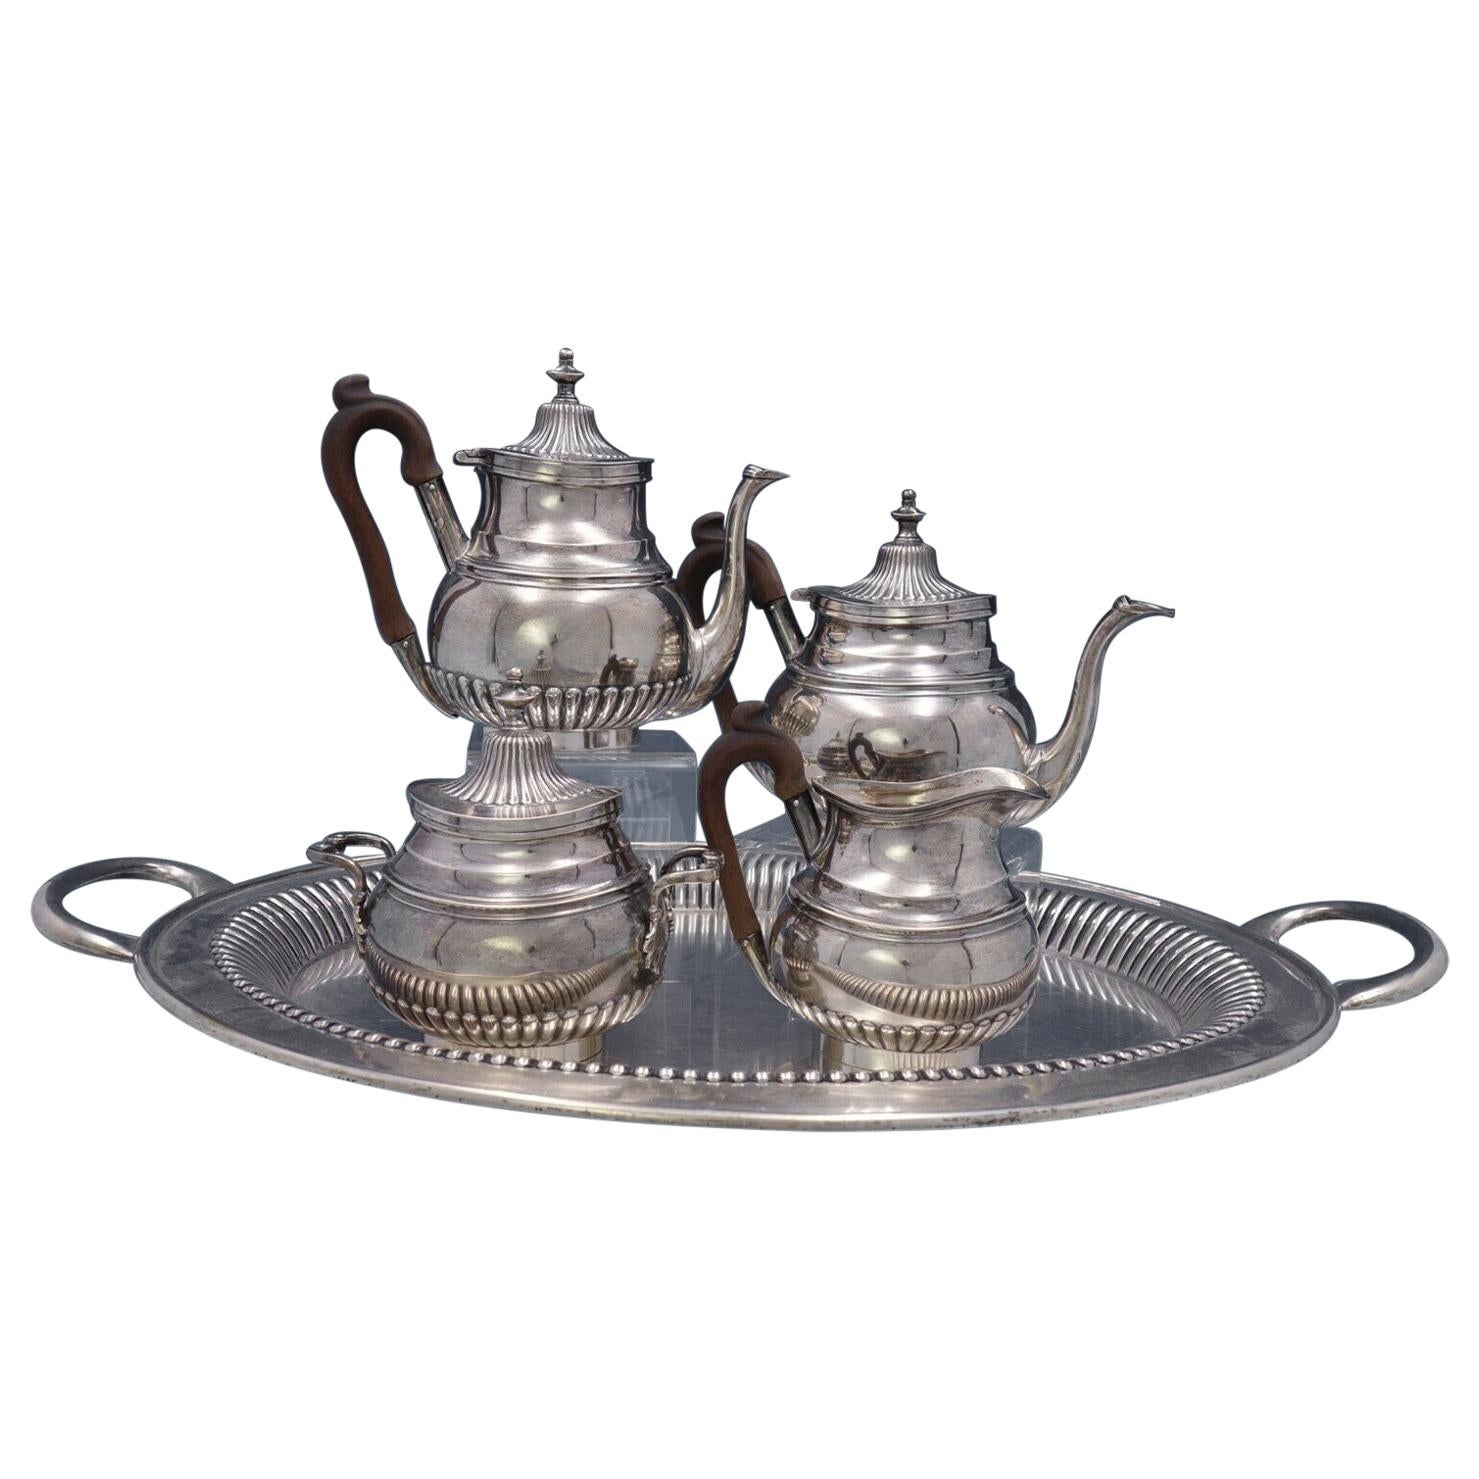 Portuguese .833 Silver Tea Set 5-Piece with Fluted / Ribbed Design